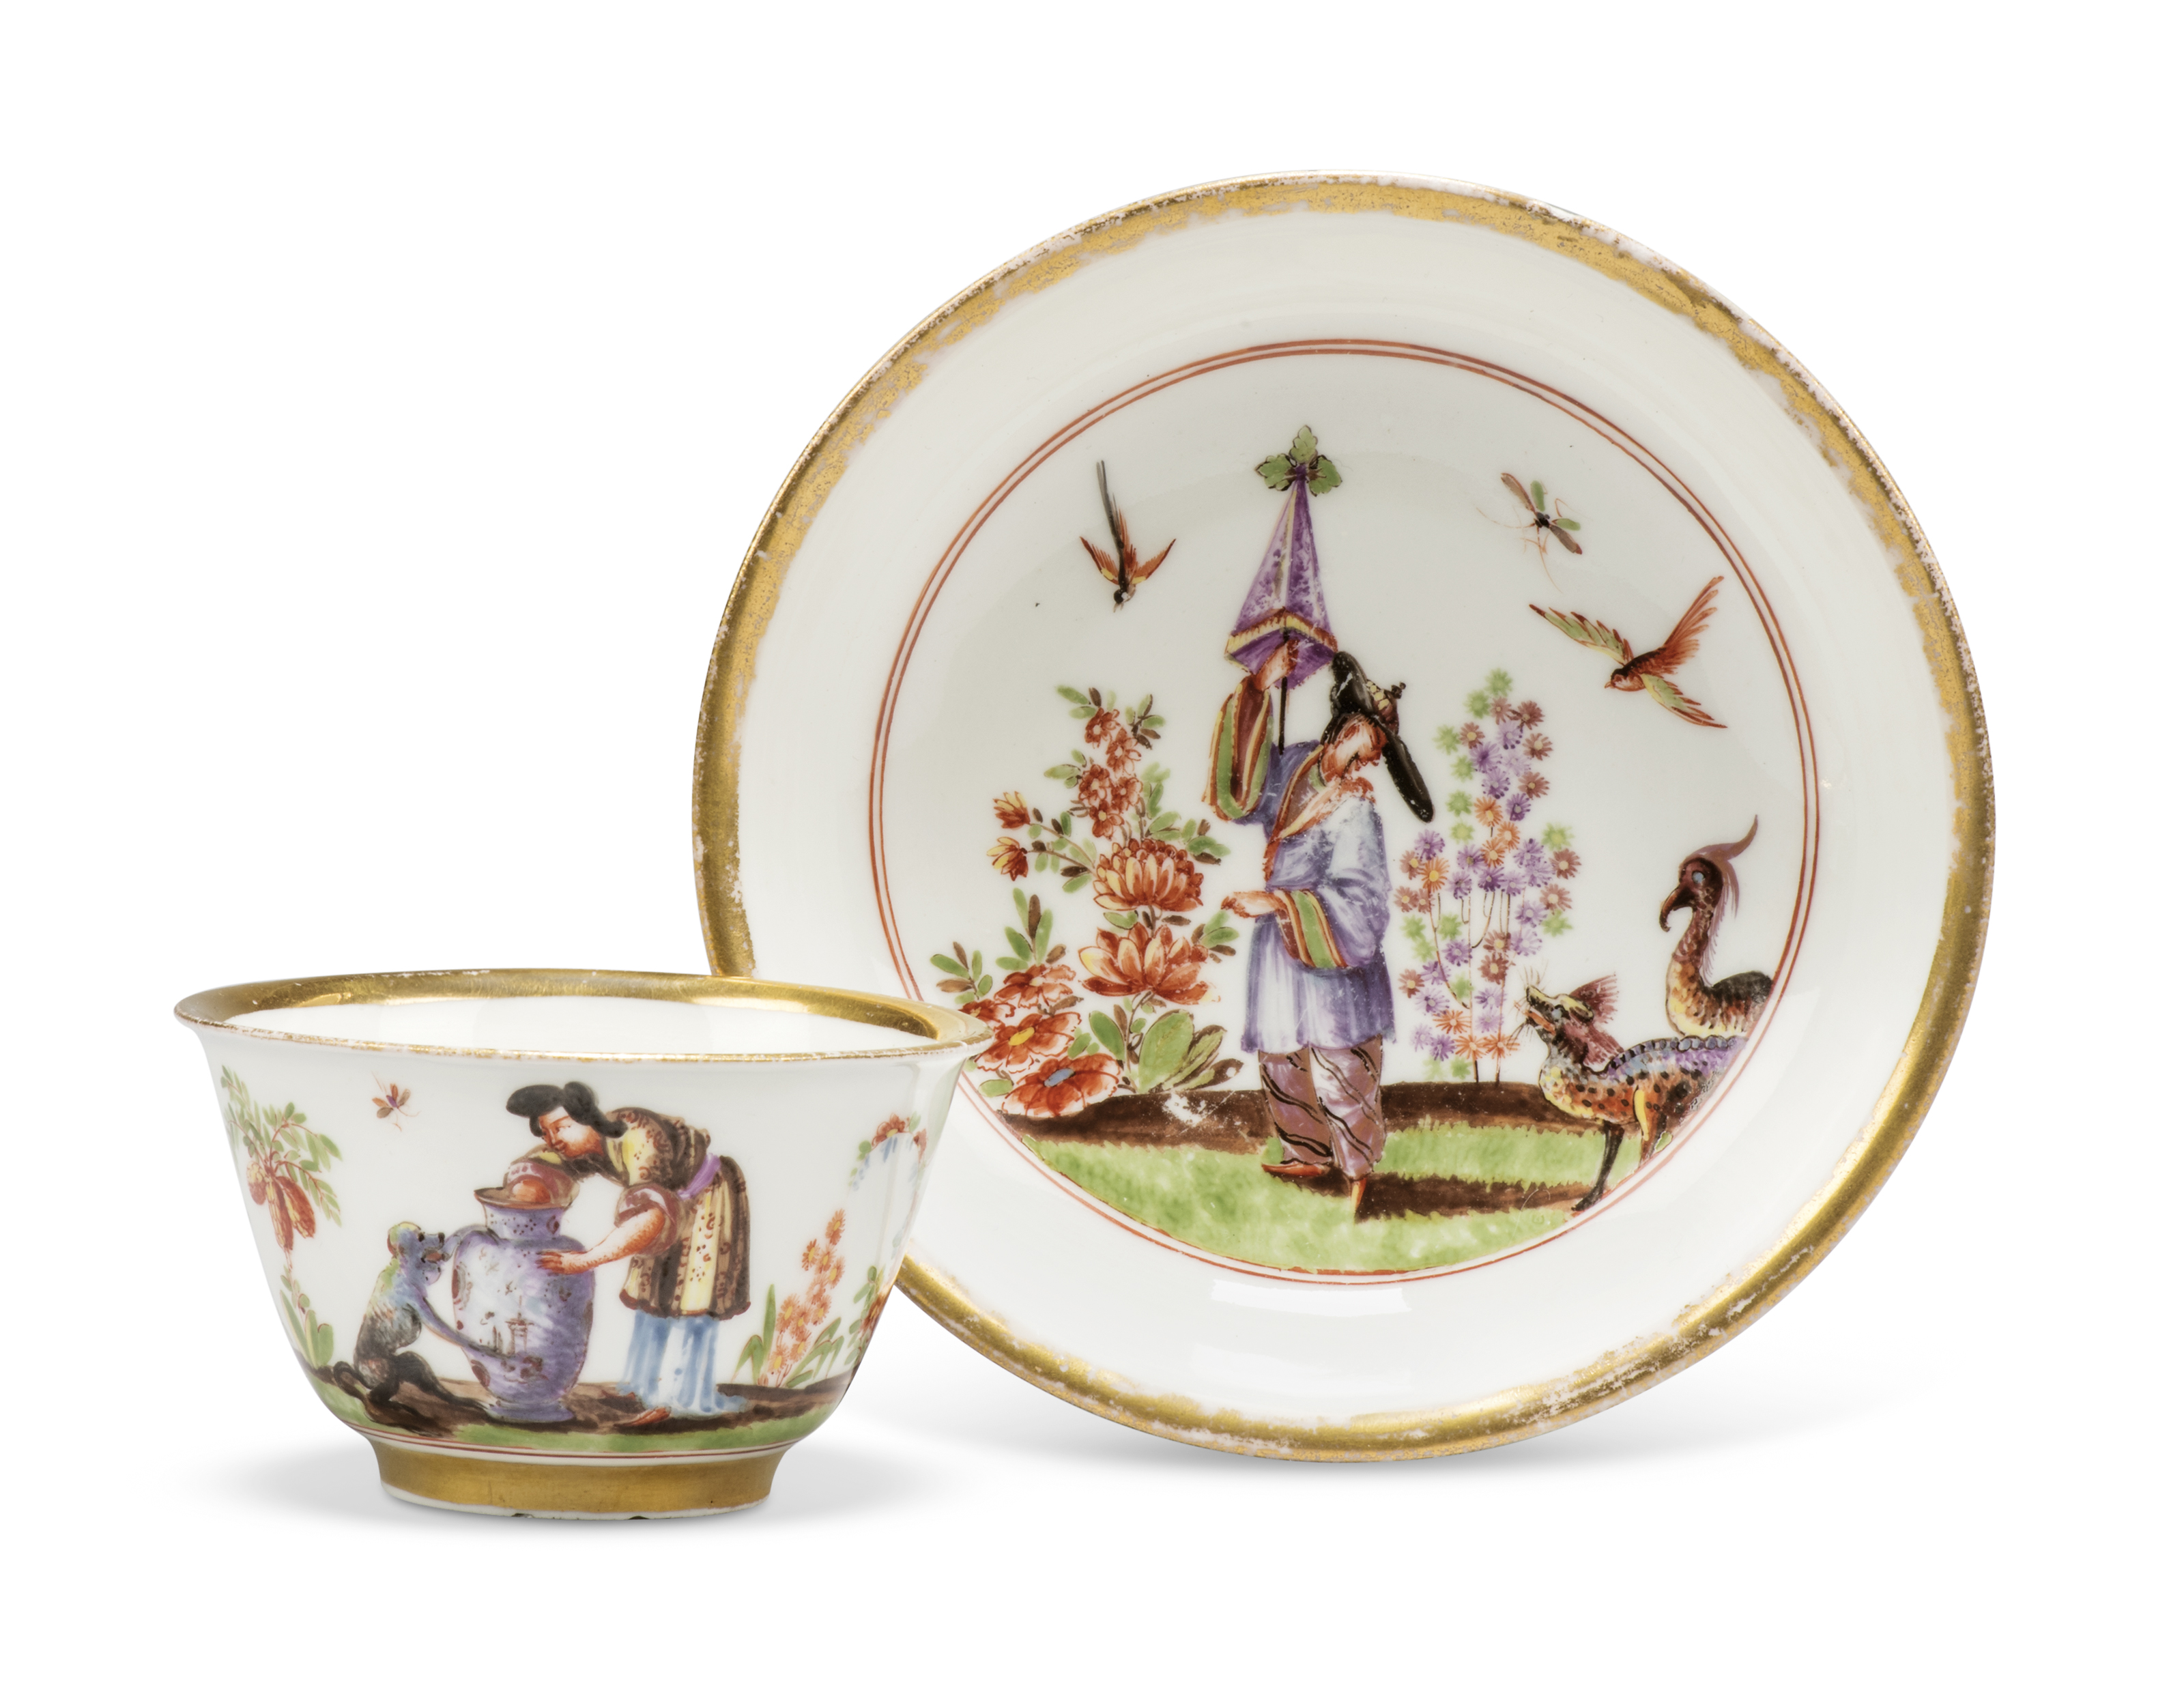 A Meissen porcelain chinoiserie tea bowl and saucer, c.1723-24, painted in the manner of J.G. Hör...